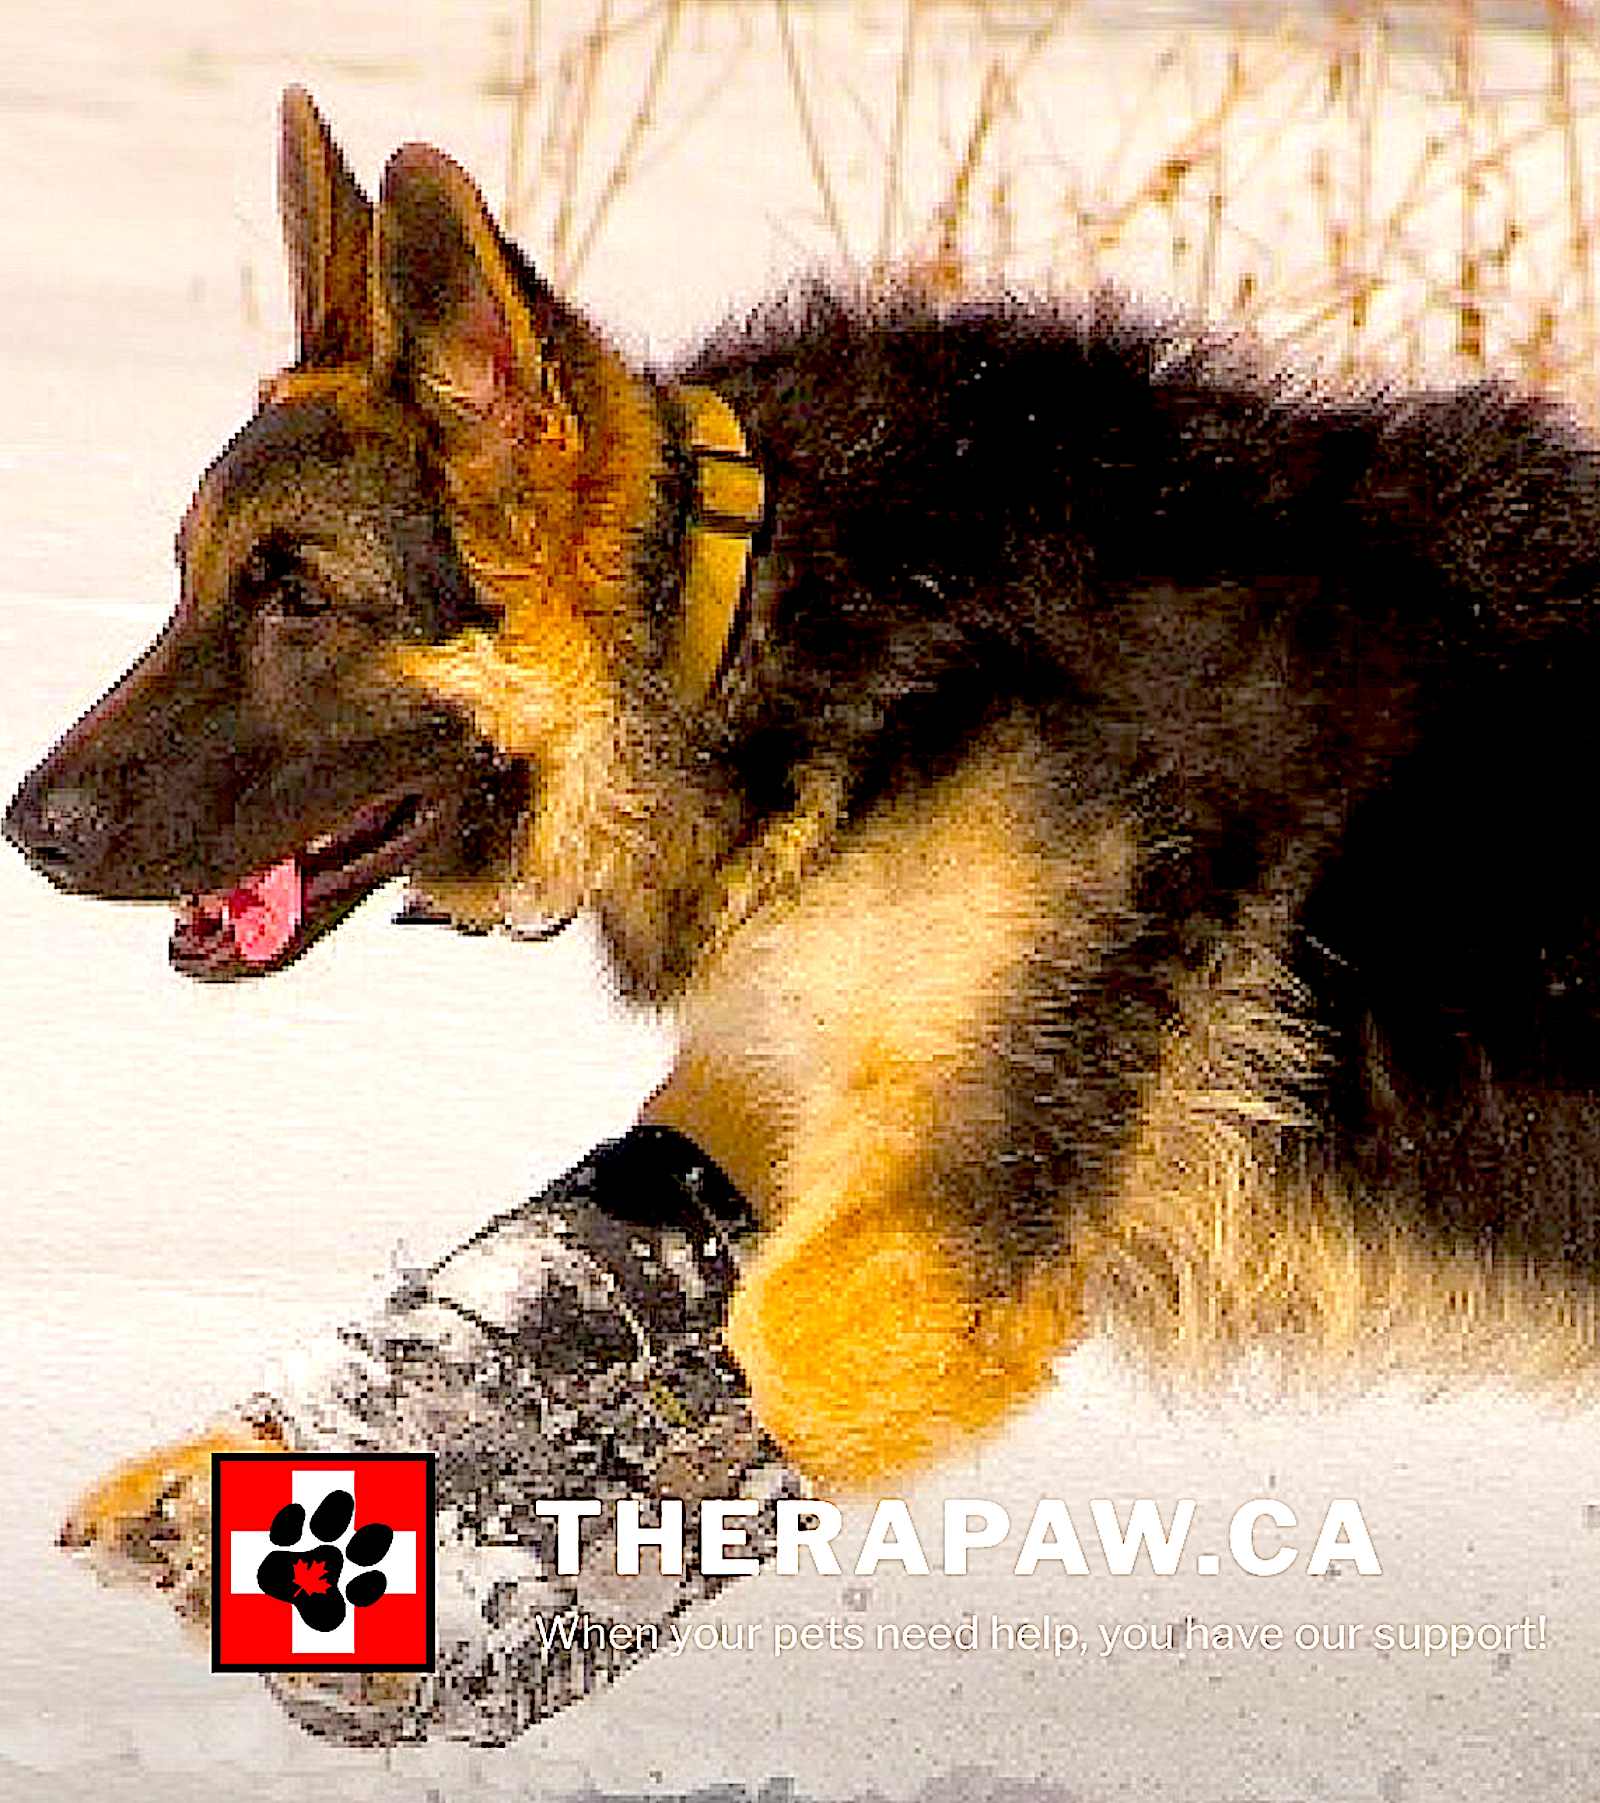 THERAPAW-CANADA: custom and standard wrist and ankle braces for injuries, pain, deviations - Vital Vet